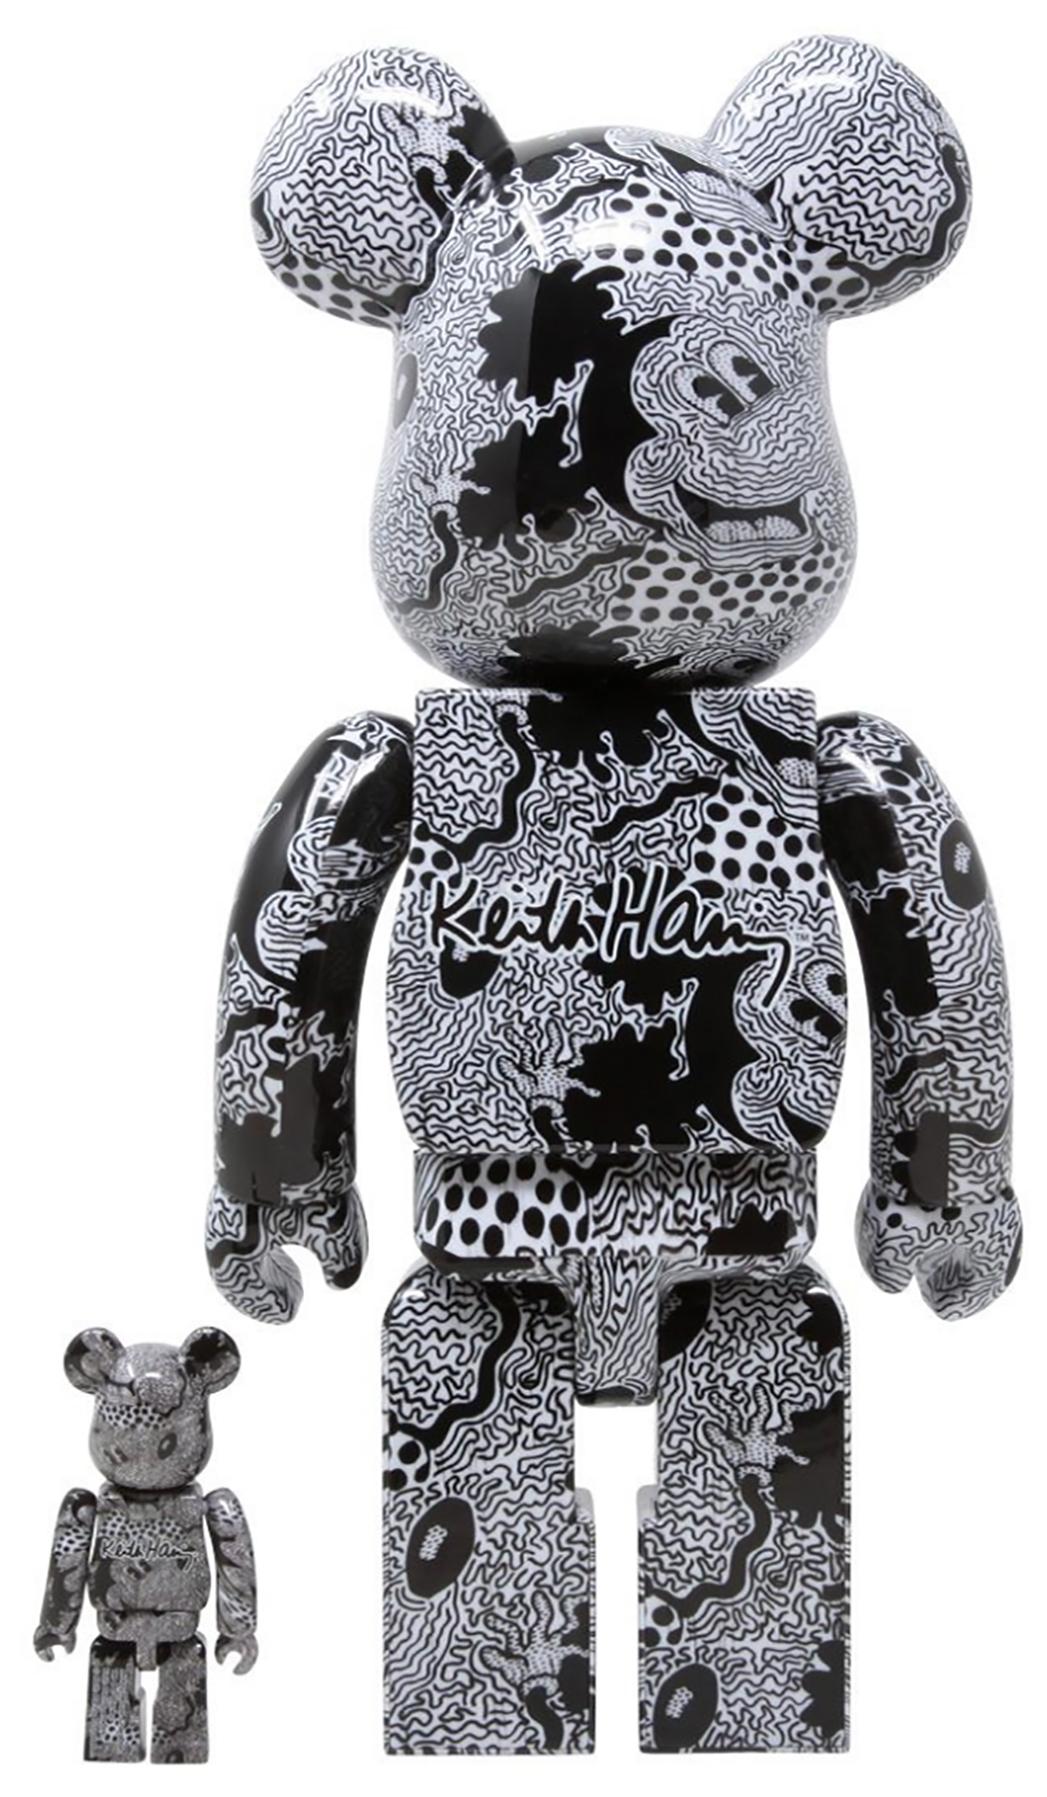 Keith Haring Bearbrick 400% companion (Haring Mickey Mouse BE@RBRICK) - Street Art Print by (after) Keith Haring